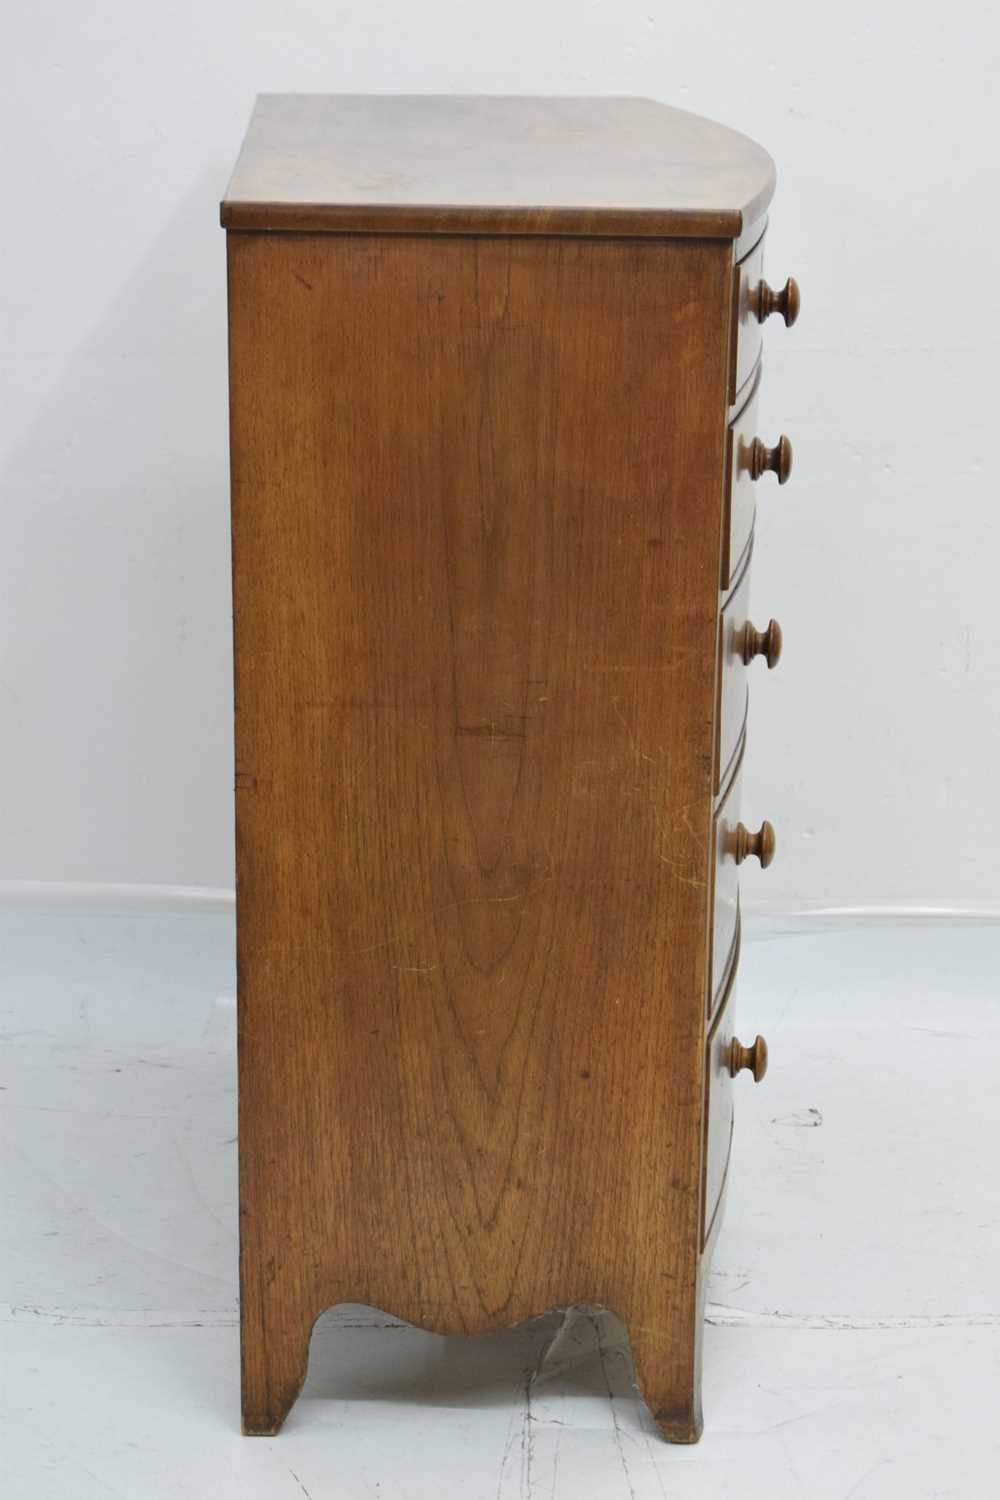 Early 19th century mahogany bowfront chest of drawers - Image 4 of 9